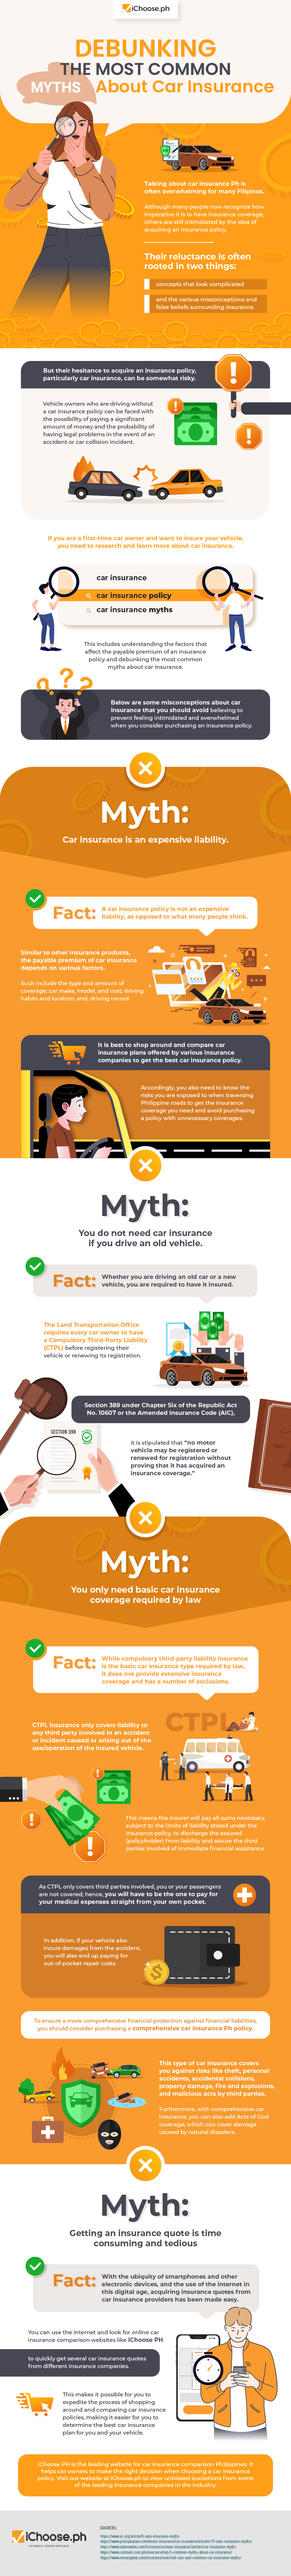 Debunking-the-Most-Common-Myths-About-Car-Insurance-Philippines-Infographic